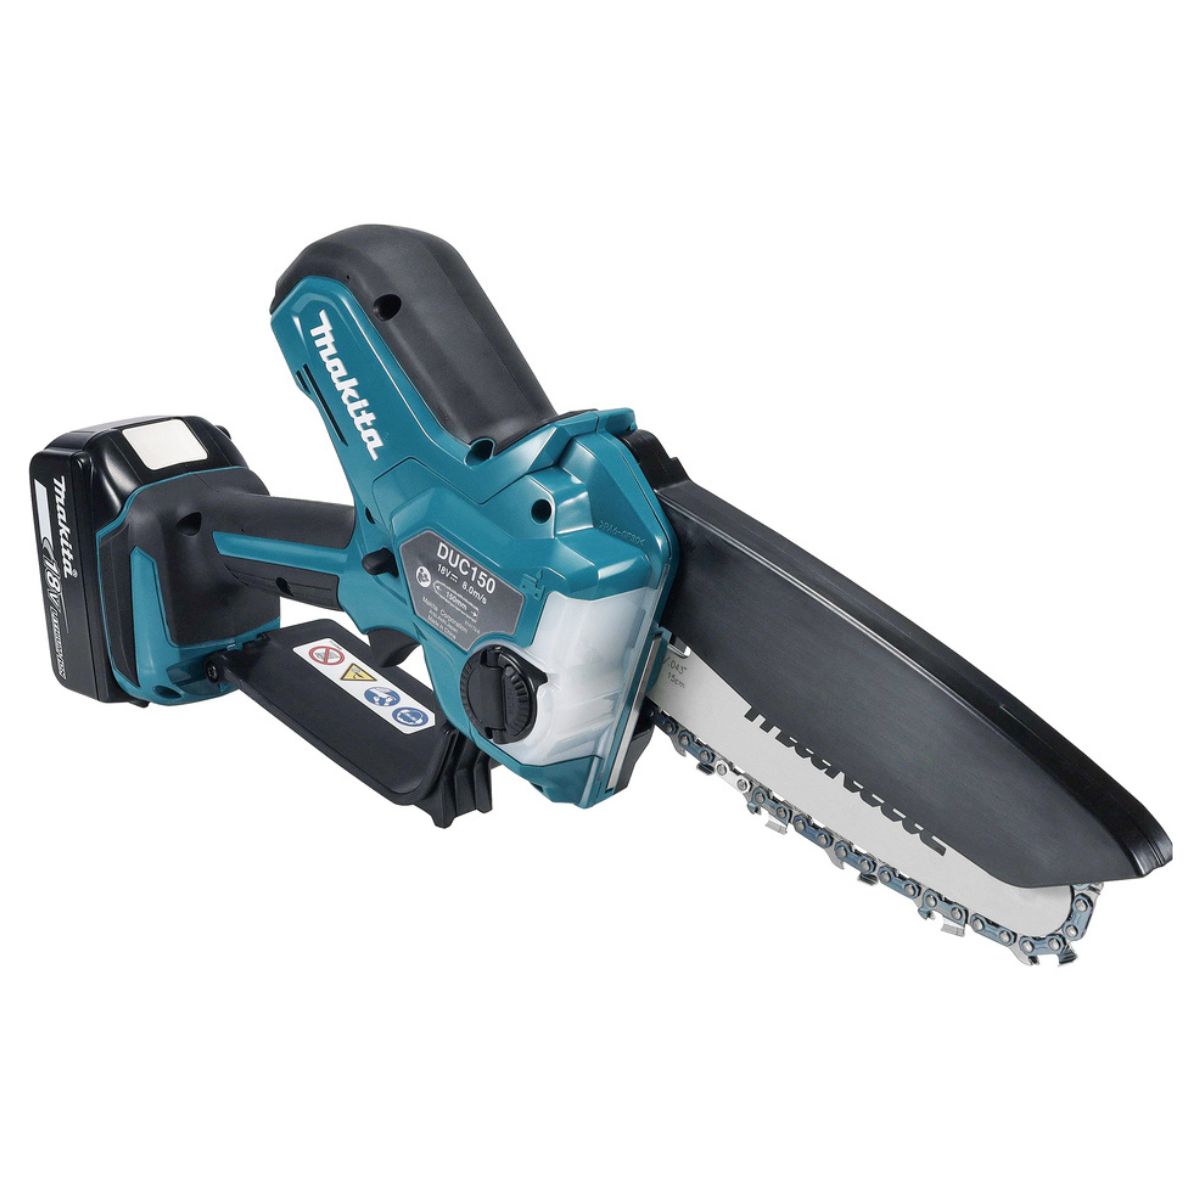 Makita DUC150Z 18V LXT Brushless 150mm Pruning Saw Body Only